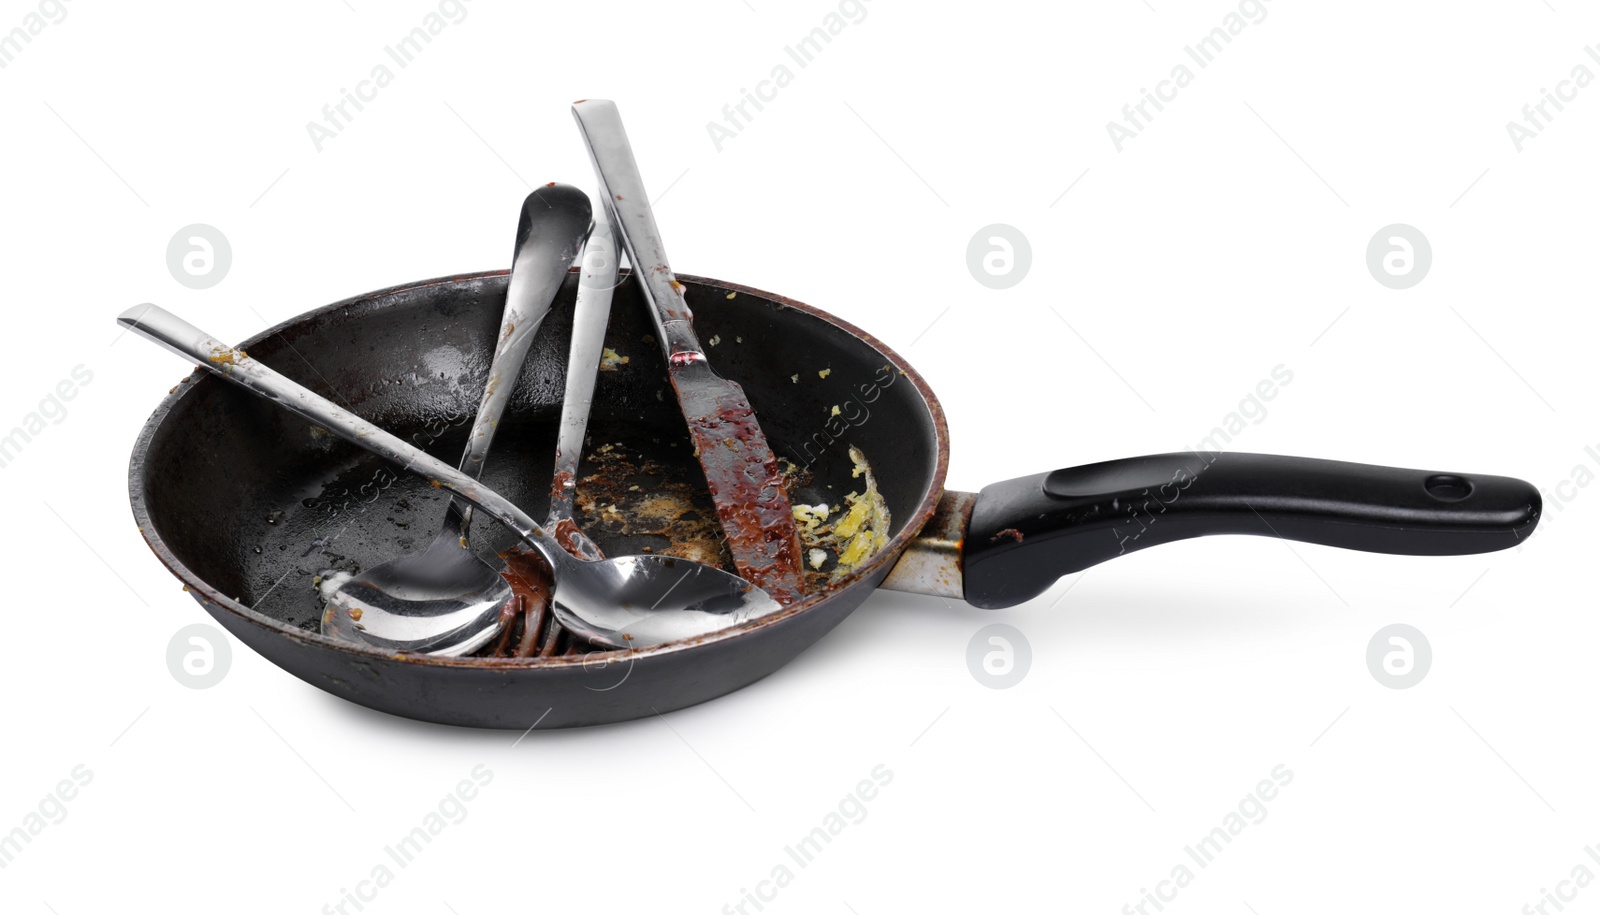 Photo of Dirty frying pan and cutlery on white background